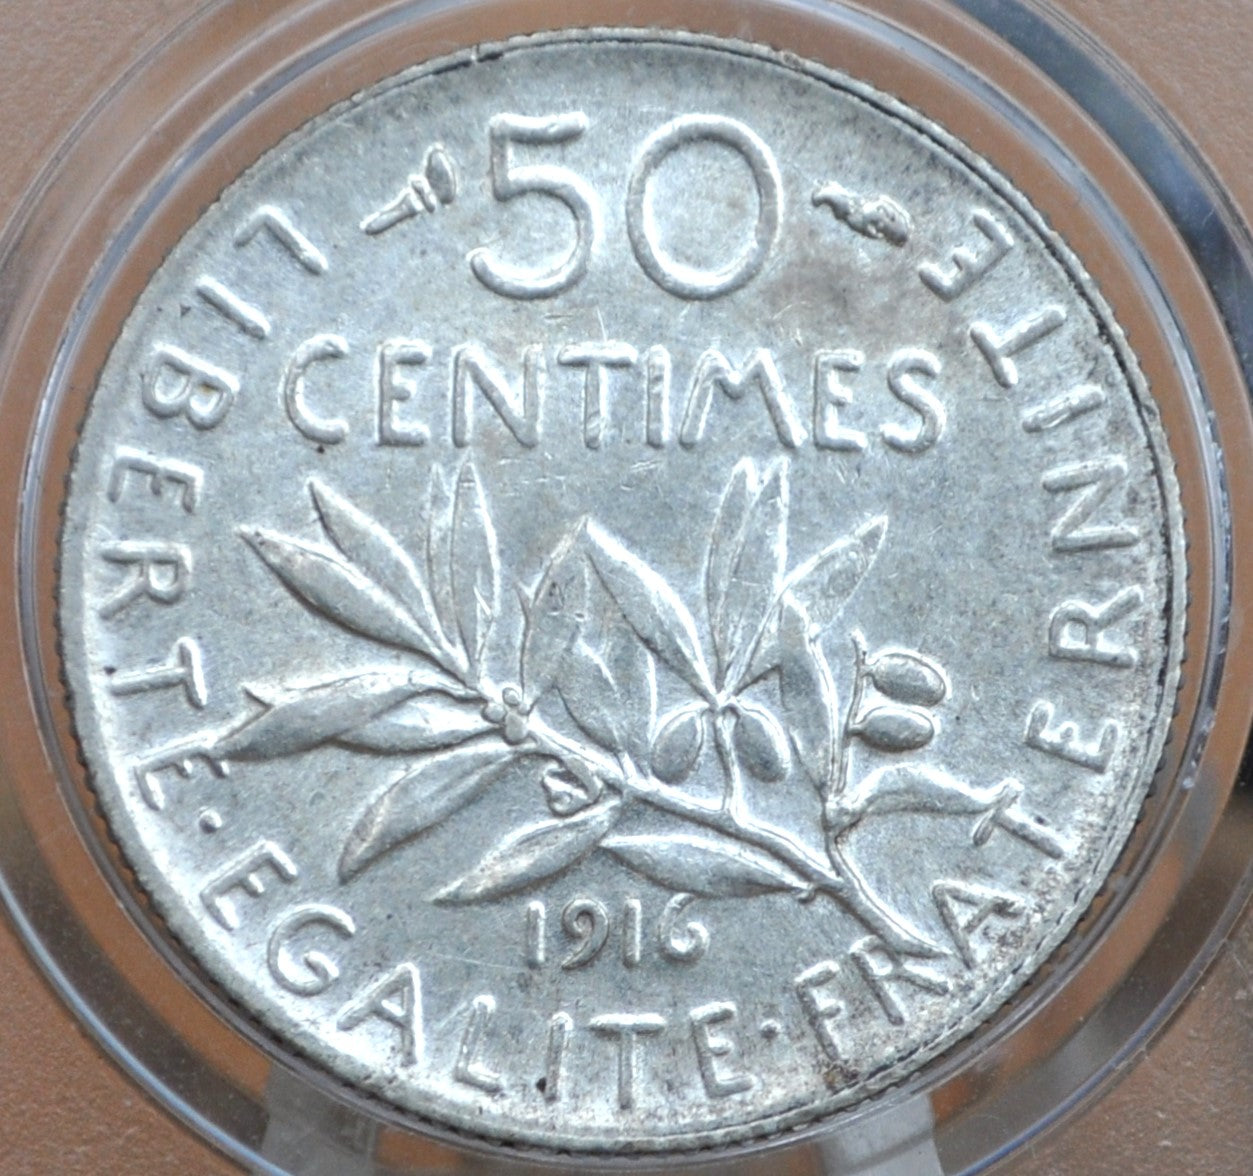 1910's French 50 Centimes Coin - Silver 50 Centimes - WWI Era - France Silver Fifty Centimes - 50 Centimes France 1916, 1917, 1919